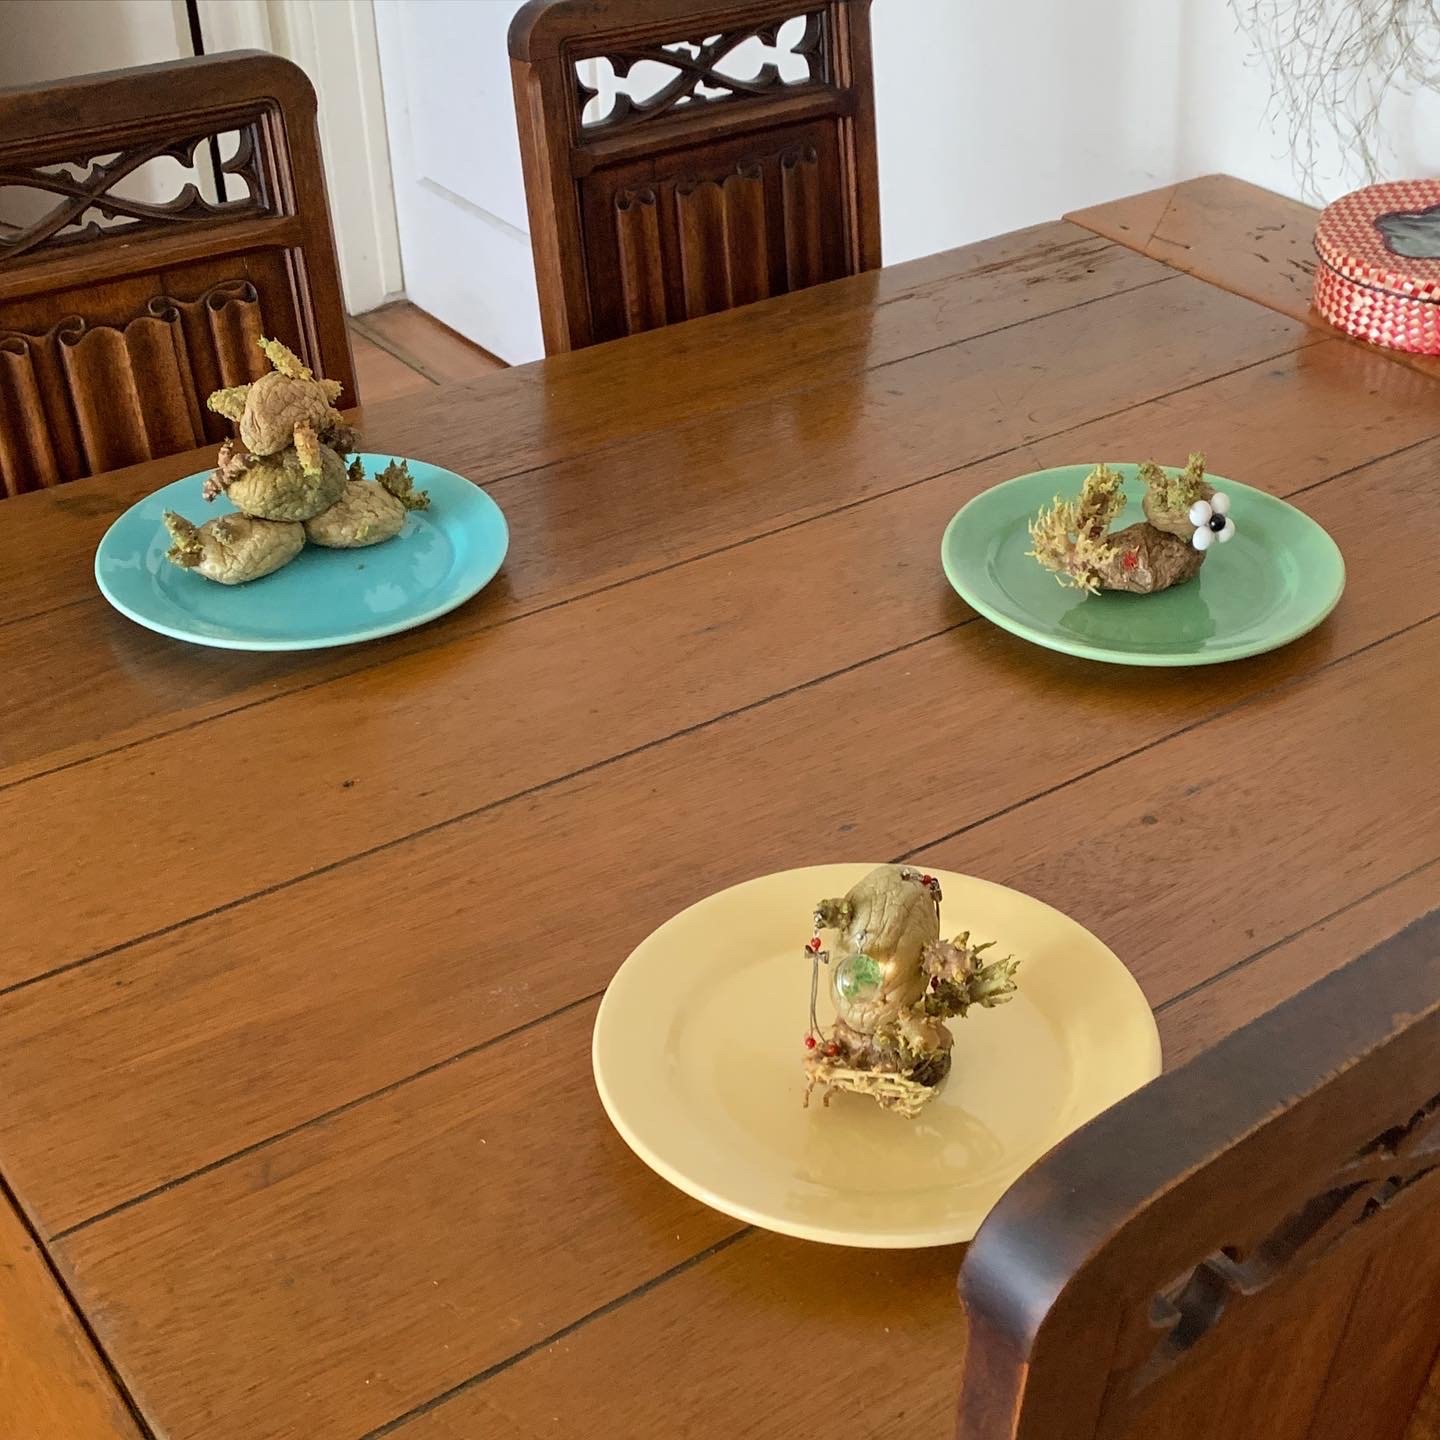 Sprouting potatoes with earrings and other findings stuck in them sit on a pastel blue, green and blue plates on a dining table. 